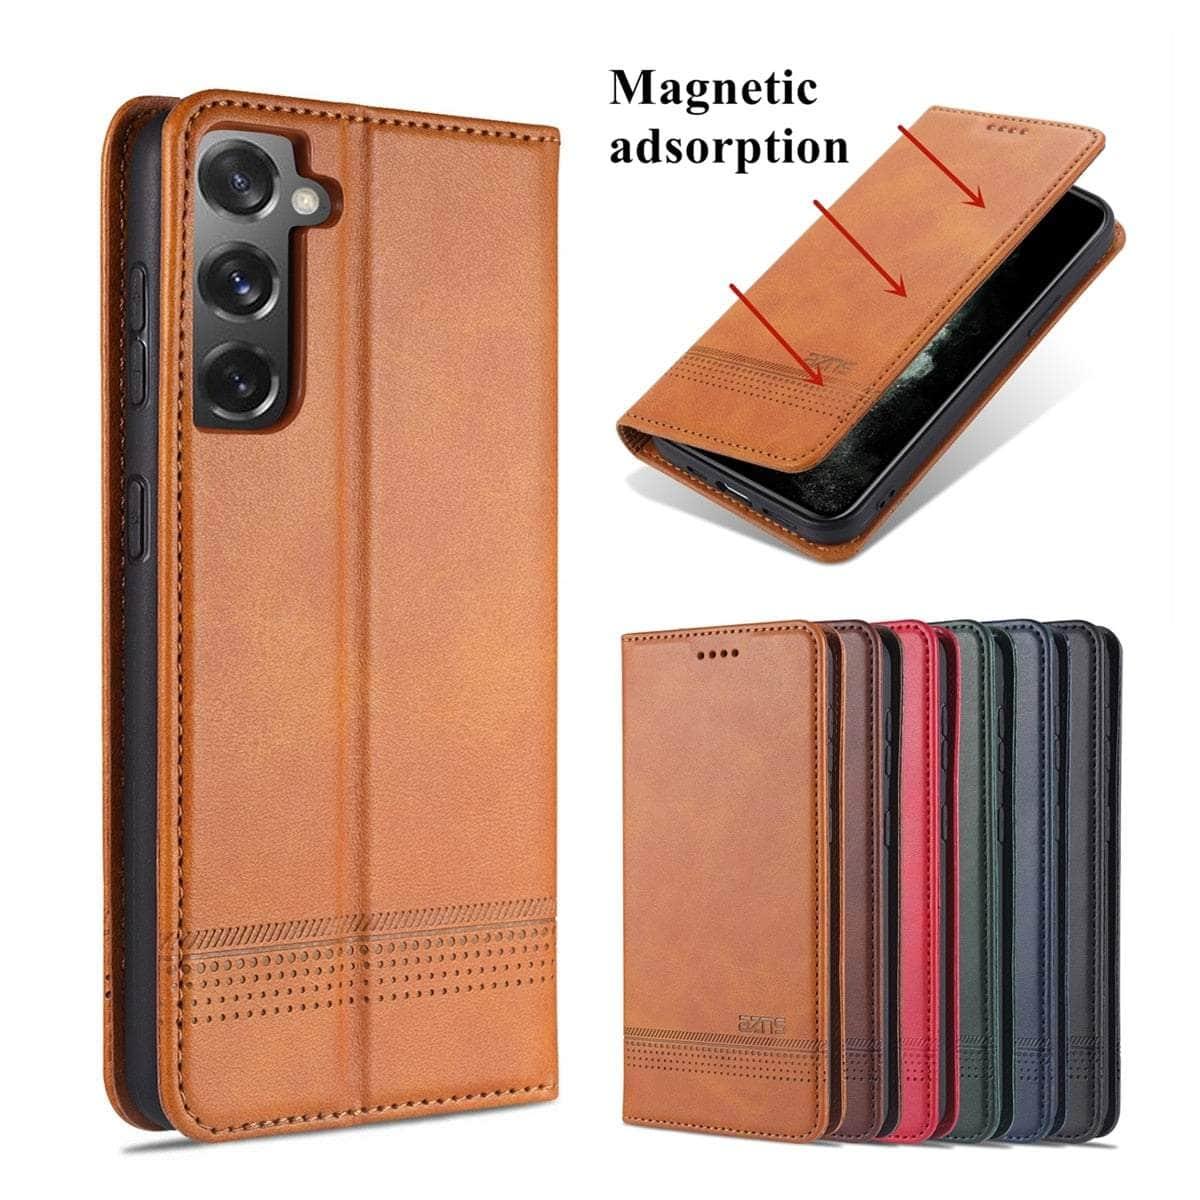 CaseBuddy Australia Casebuddy Deluxe Magnetic Heat Adsorption S22 Leather Case